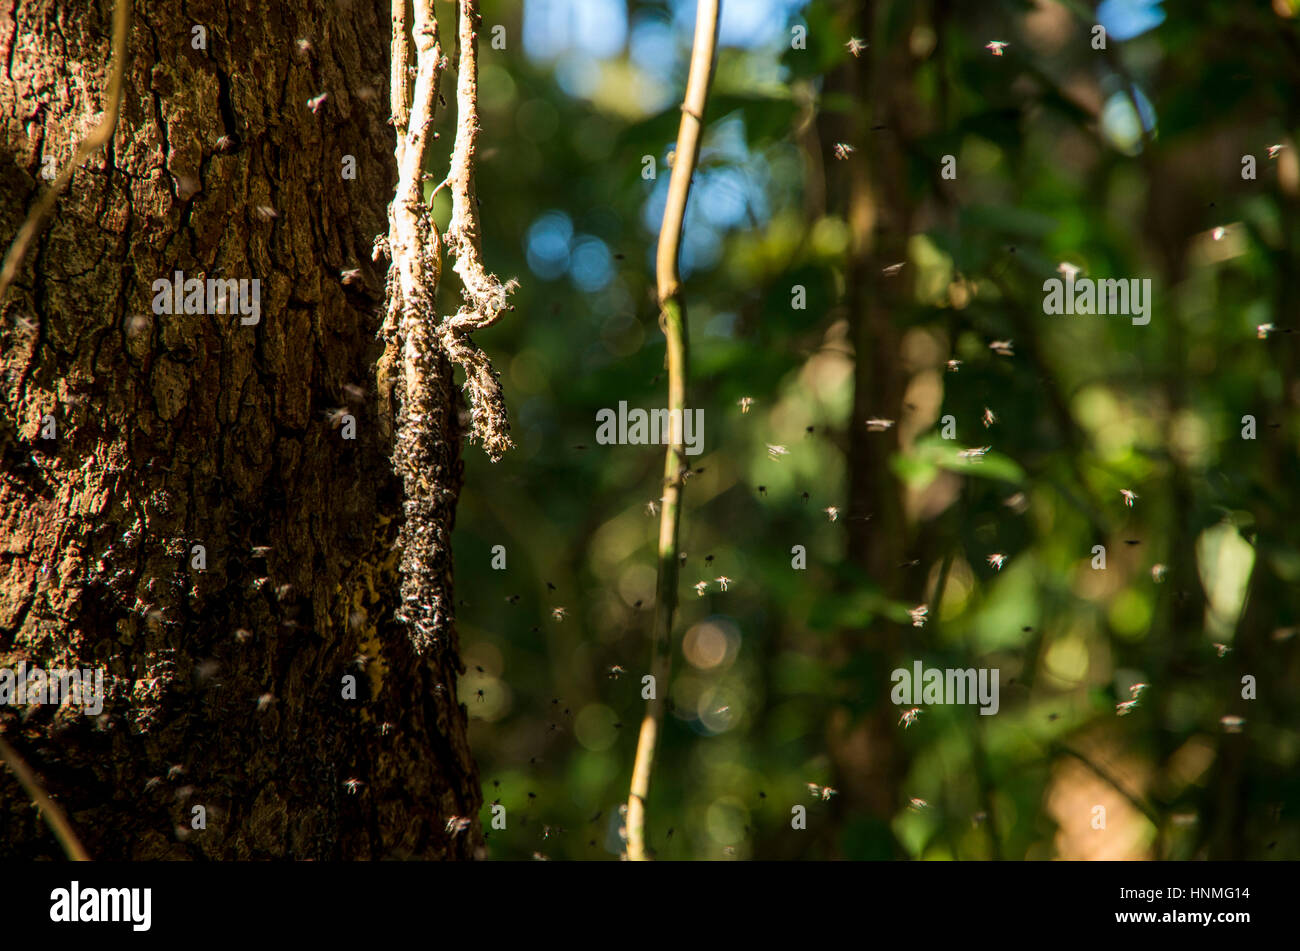 Insects buzzing around fruit of tree in tropical forest. Stock Photo